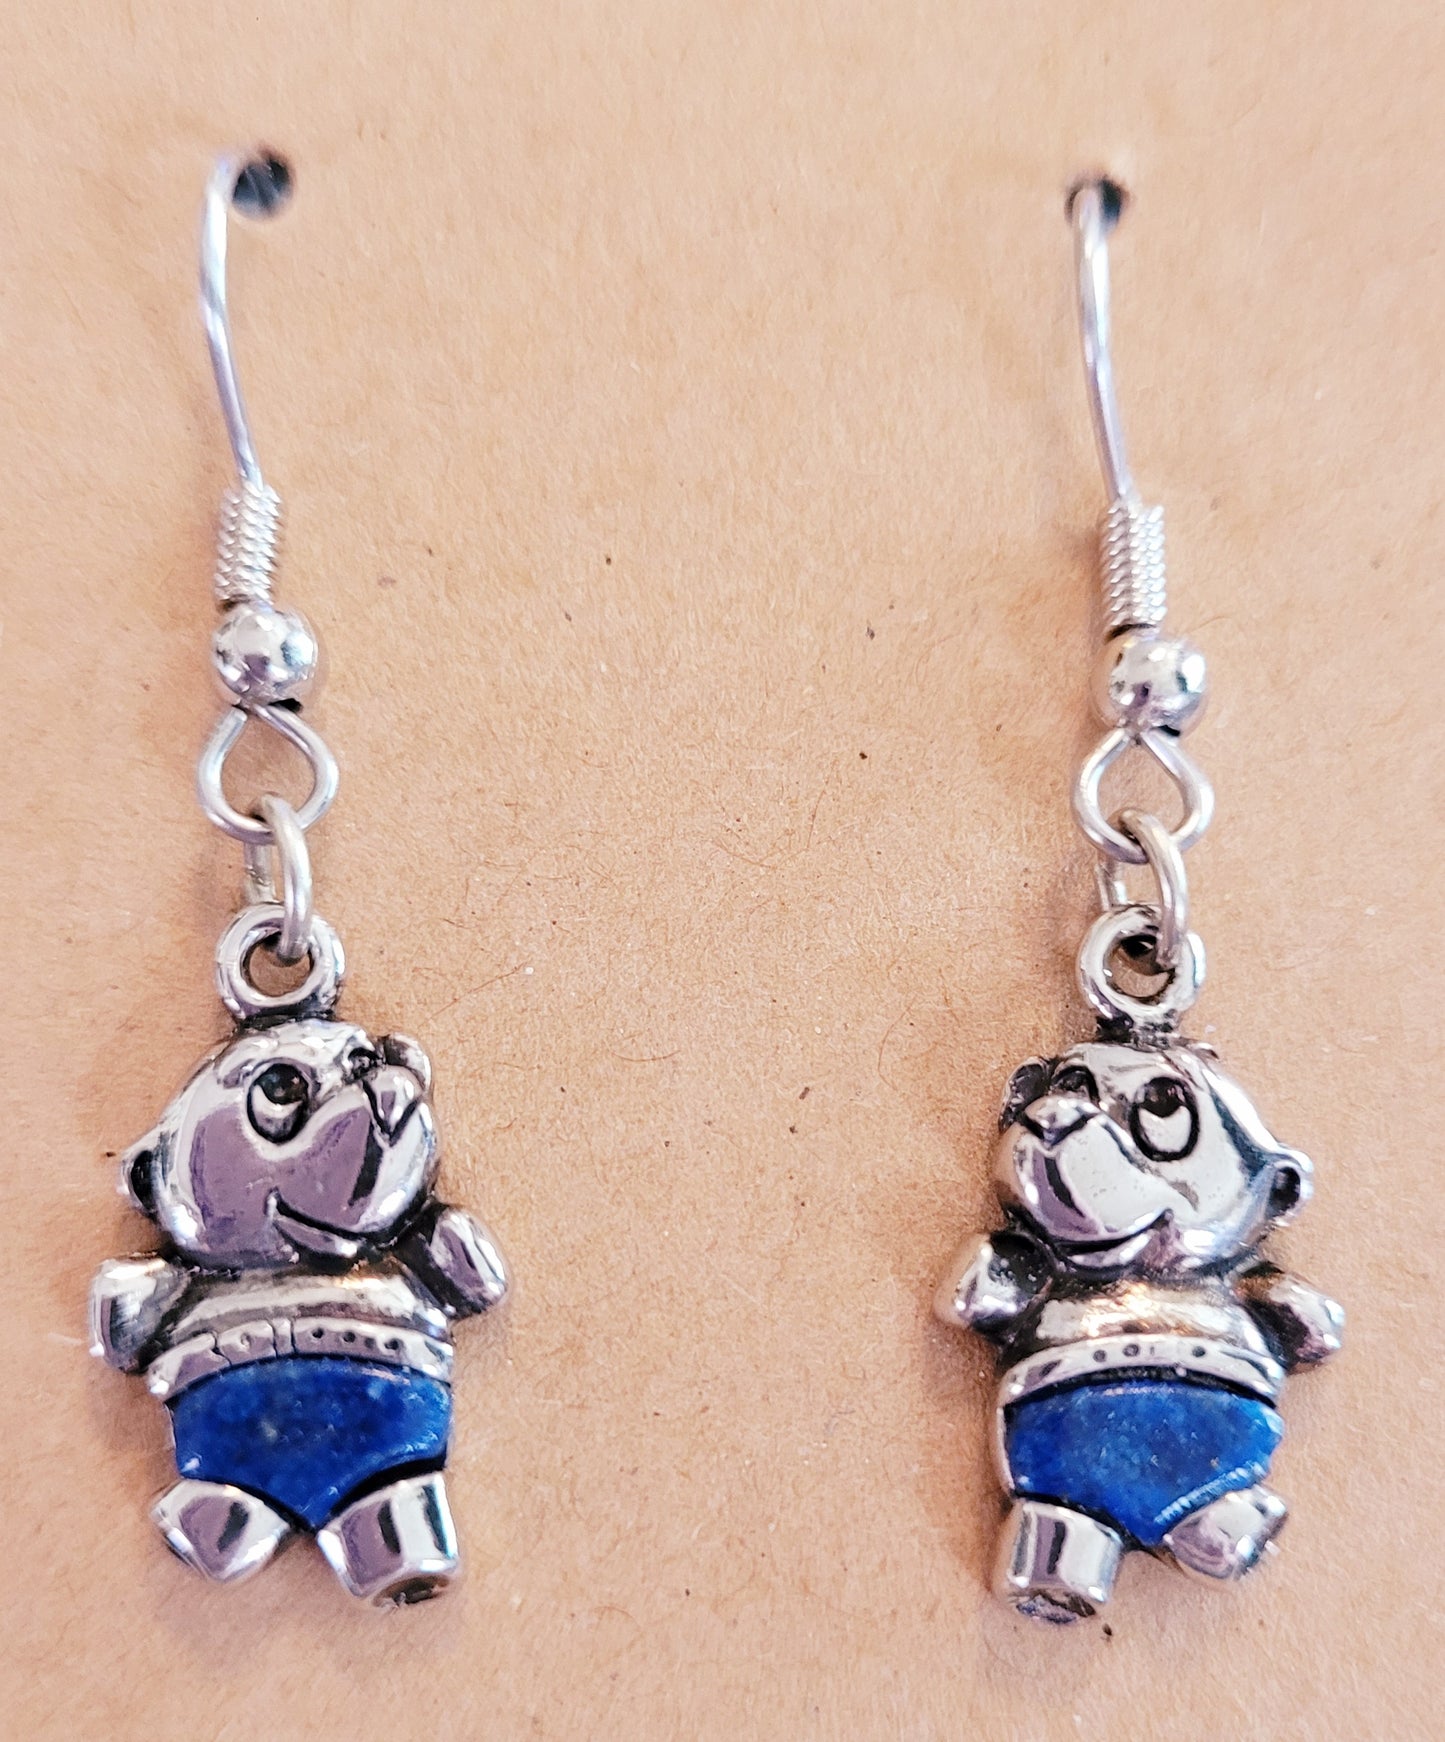 New - Pair of Adorable Silver/Blue Lapis Stone Teddy Bear Dangle Earrings *New